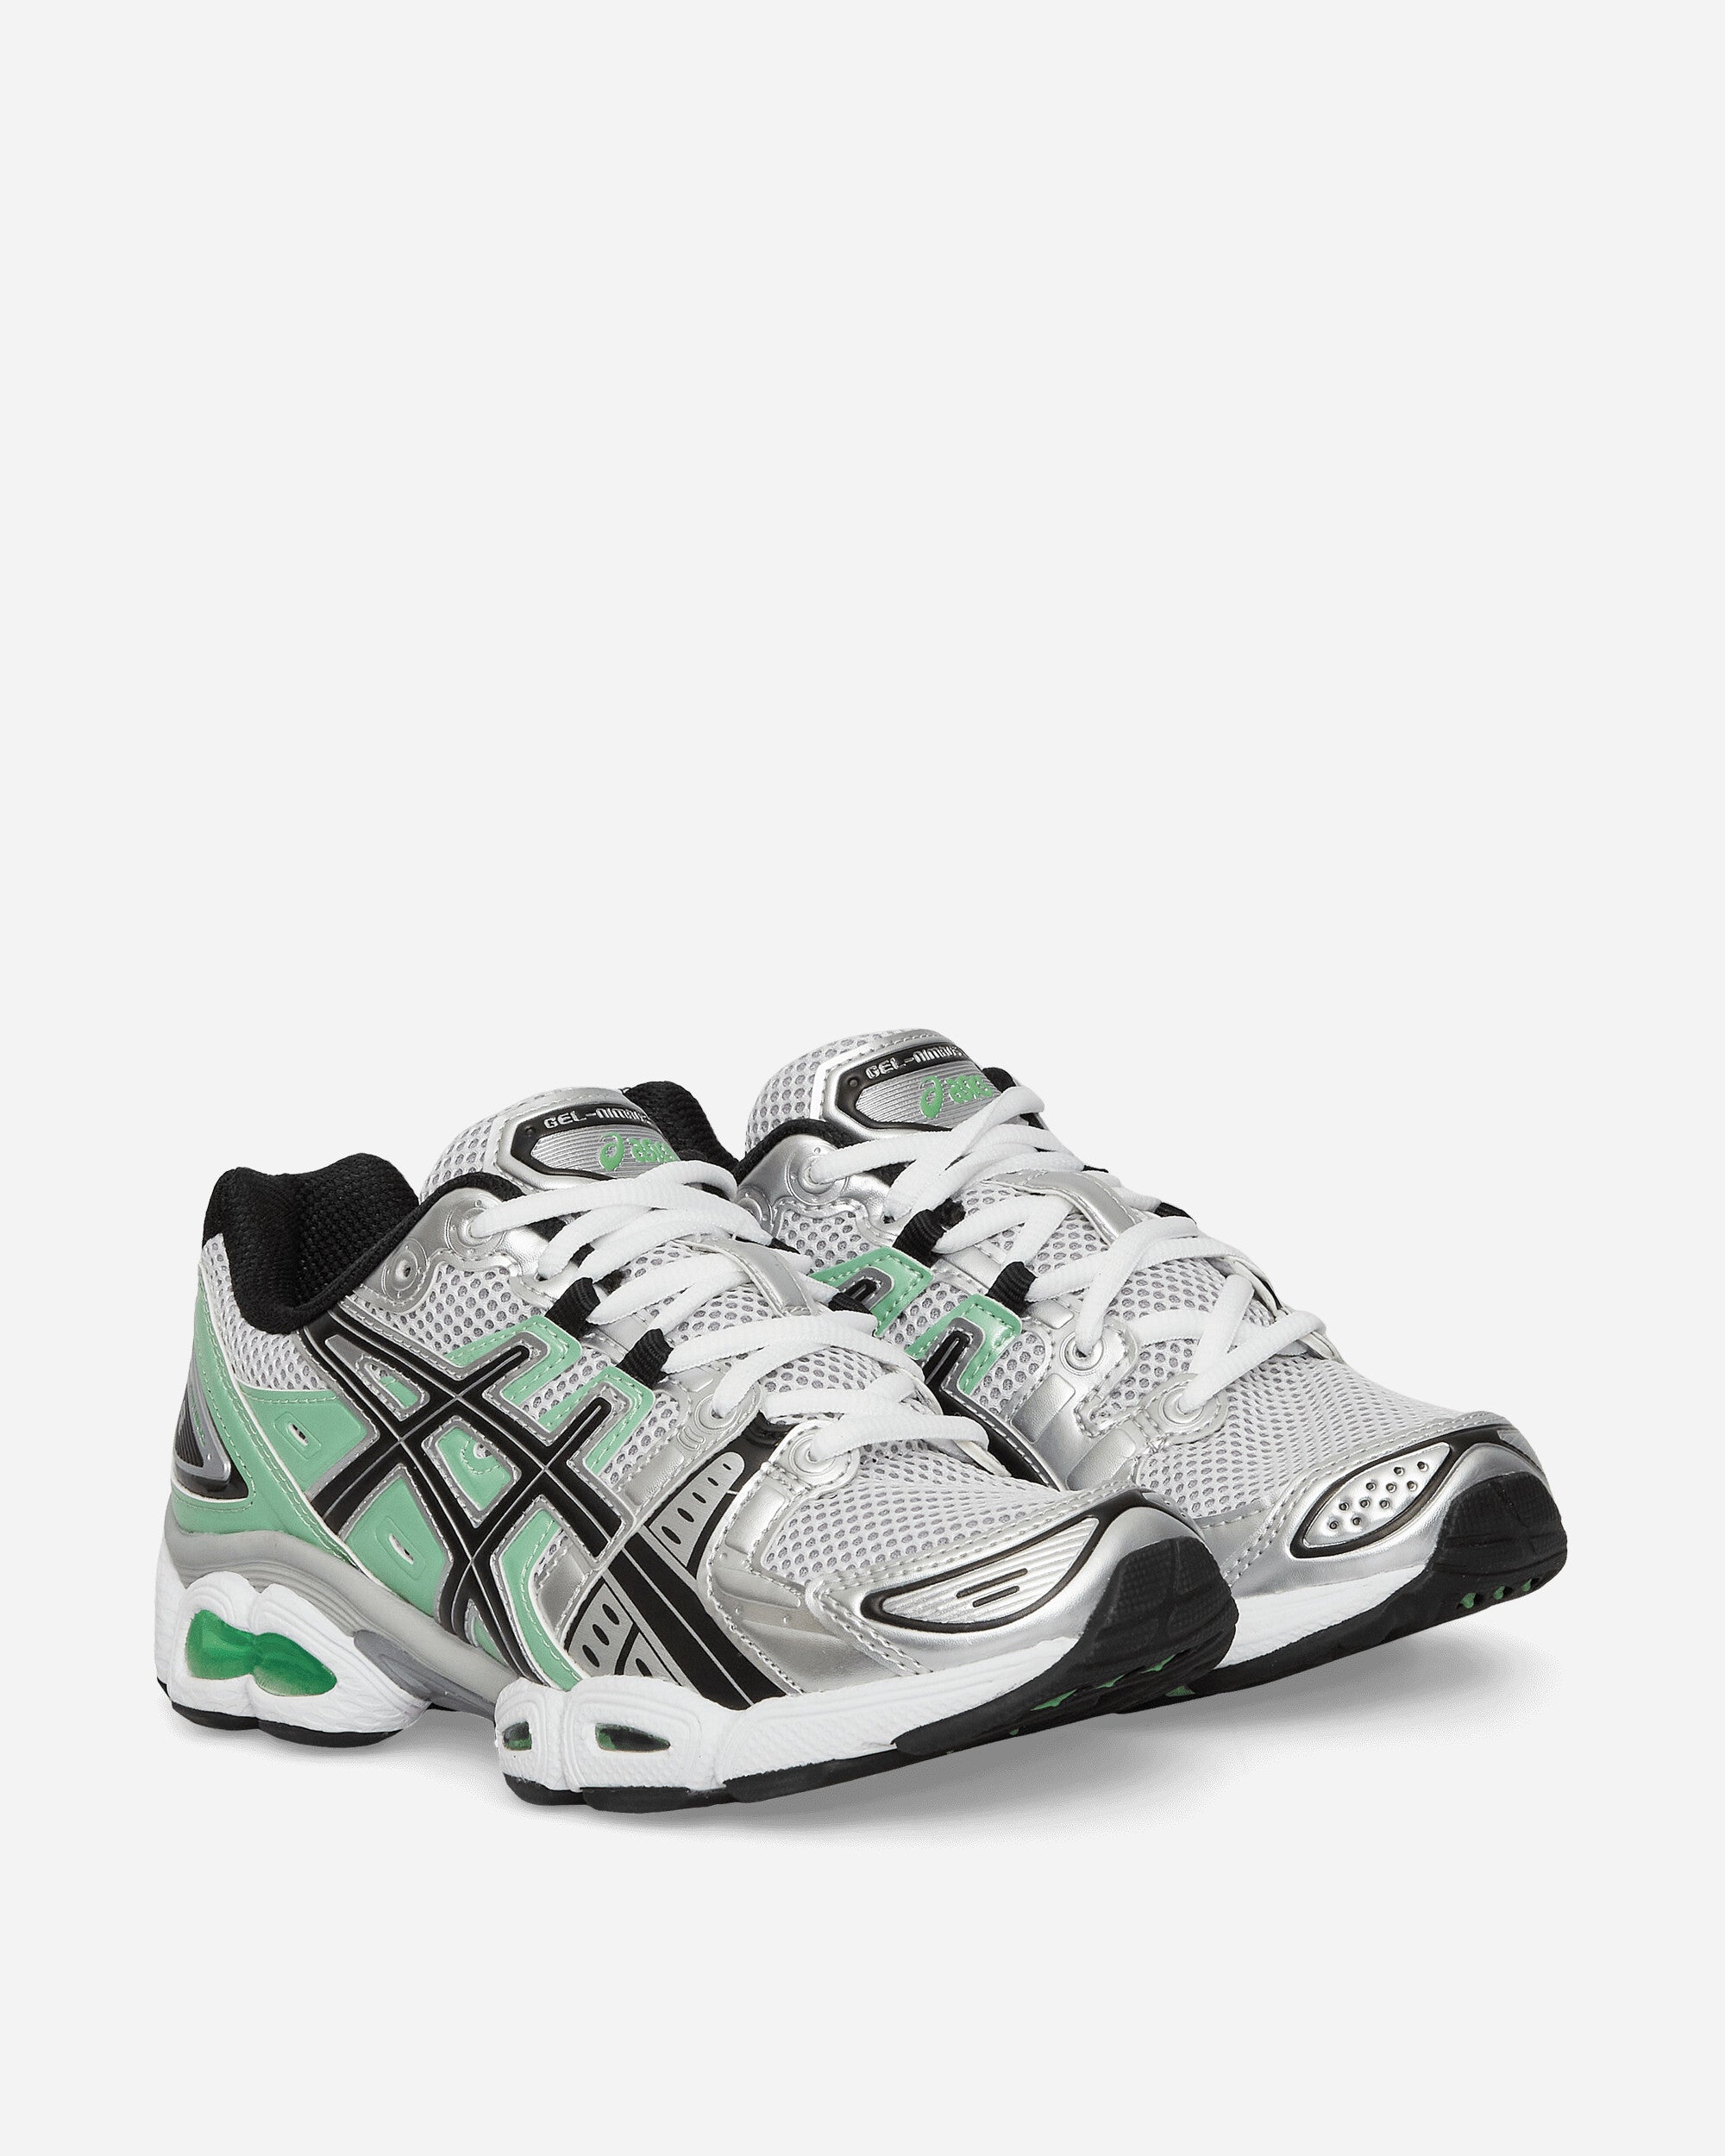 Asics Wmns Gel-Nimbus 9 White/Bamboo Sneakers Low 1202A278-109